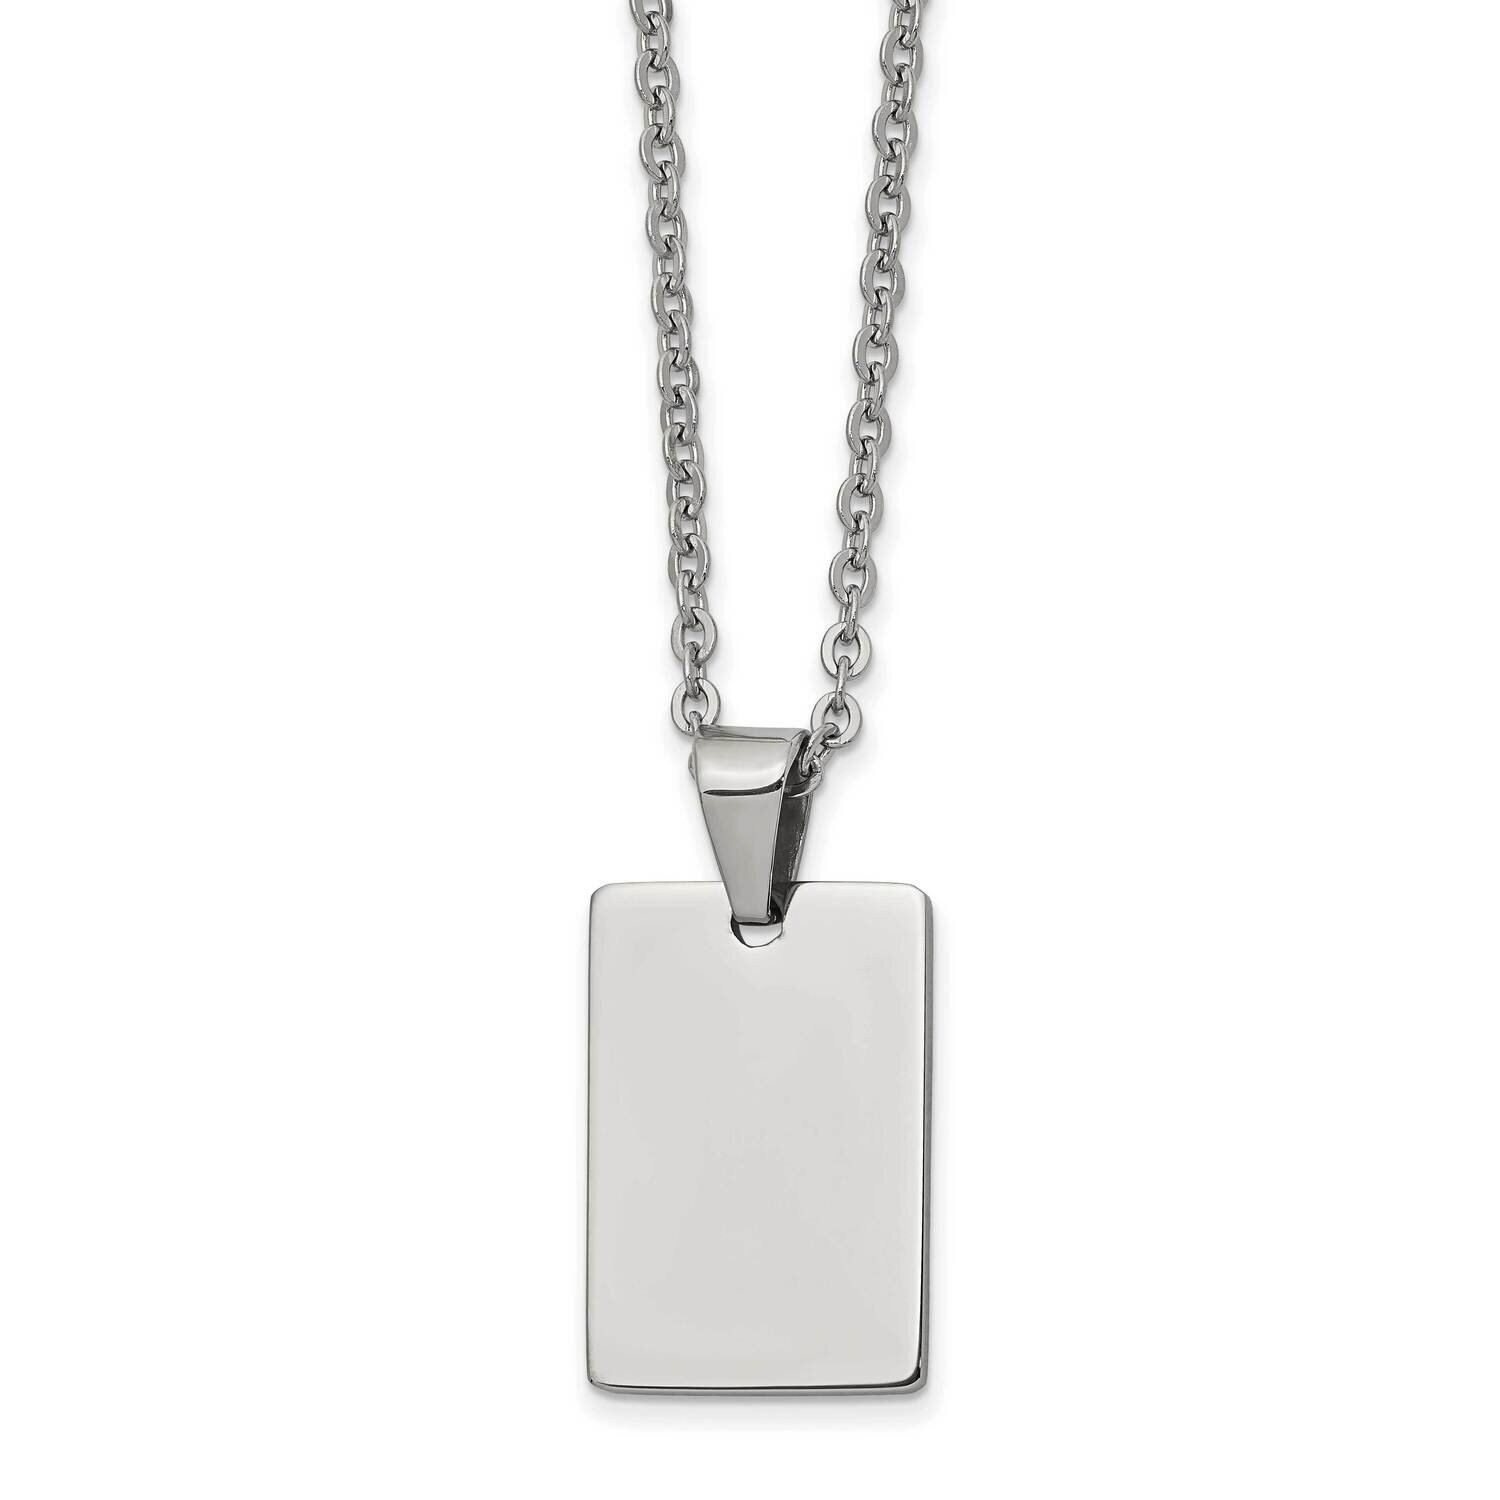 Engravable Dog Tag Pendant Necklace Stainless Steel SRN898-18